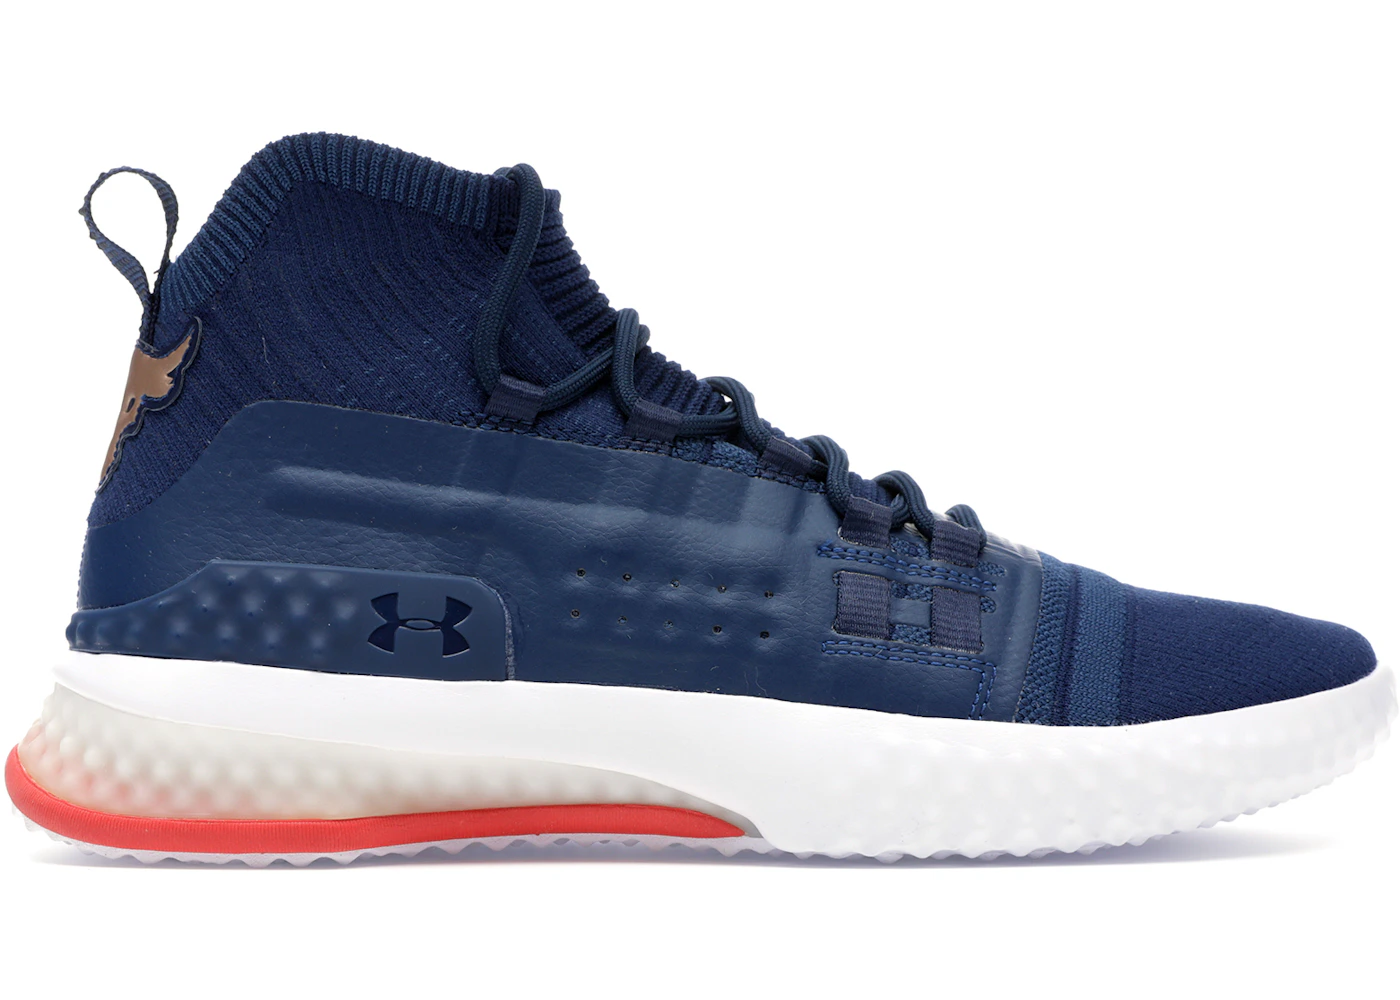 Under Armour Project Rock 1 Blue Red - 3020788-401 - US